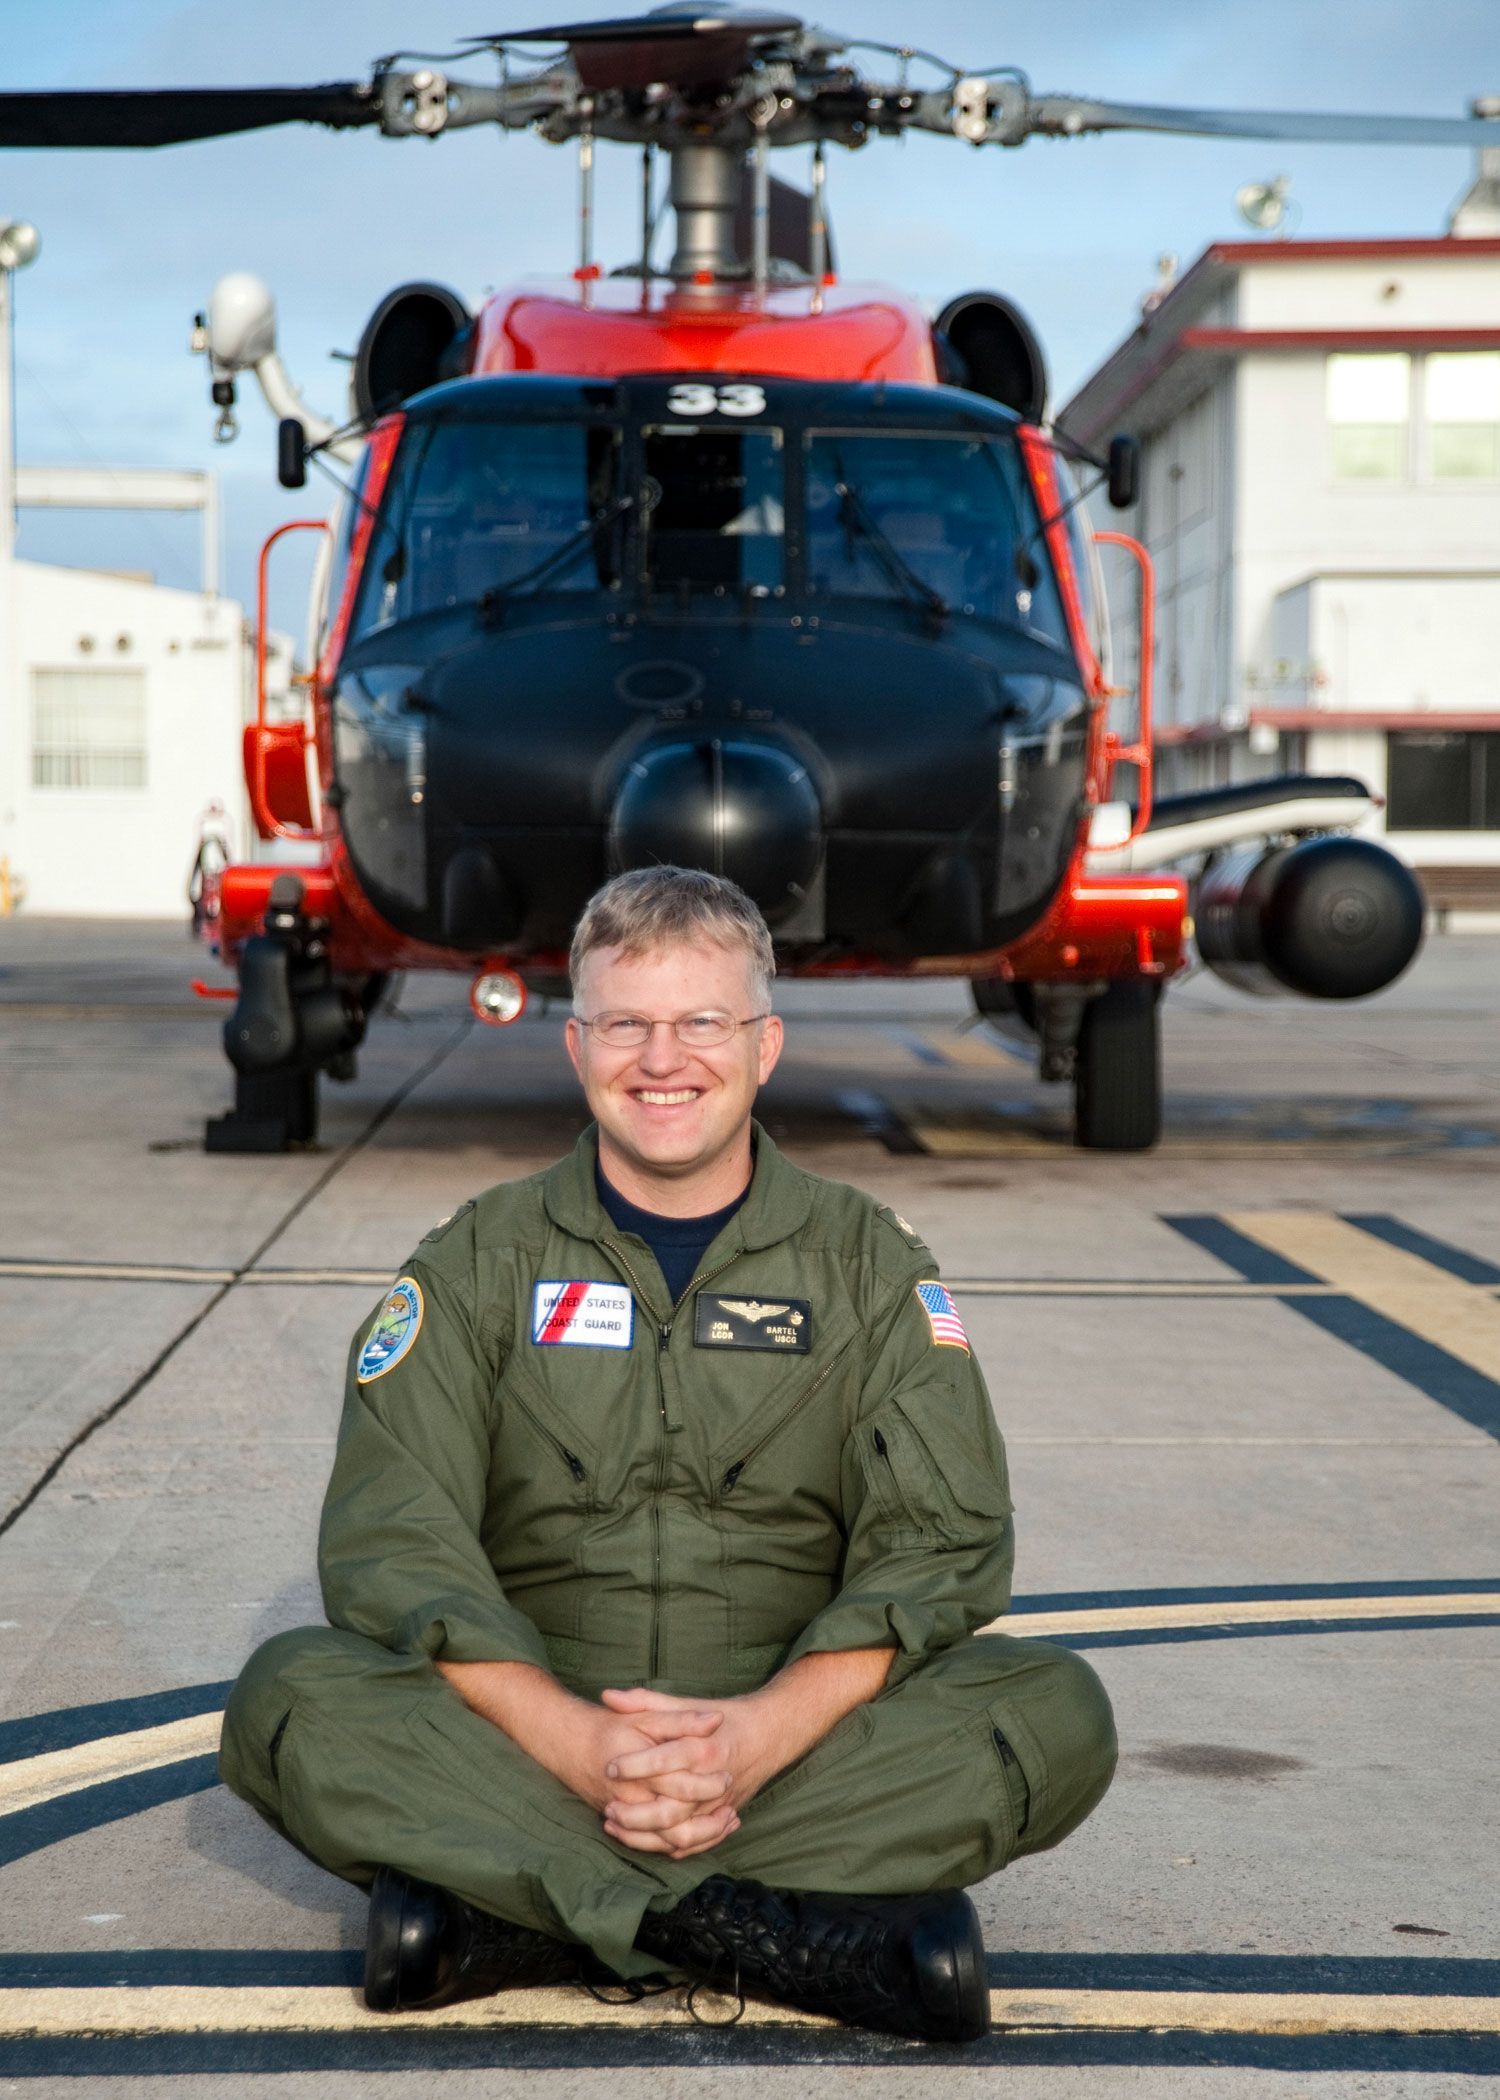 Jon Bartel smiling and sitting on the ground in front of a Coast Guard helicopter